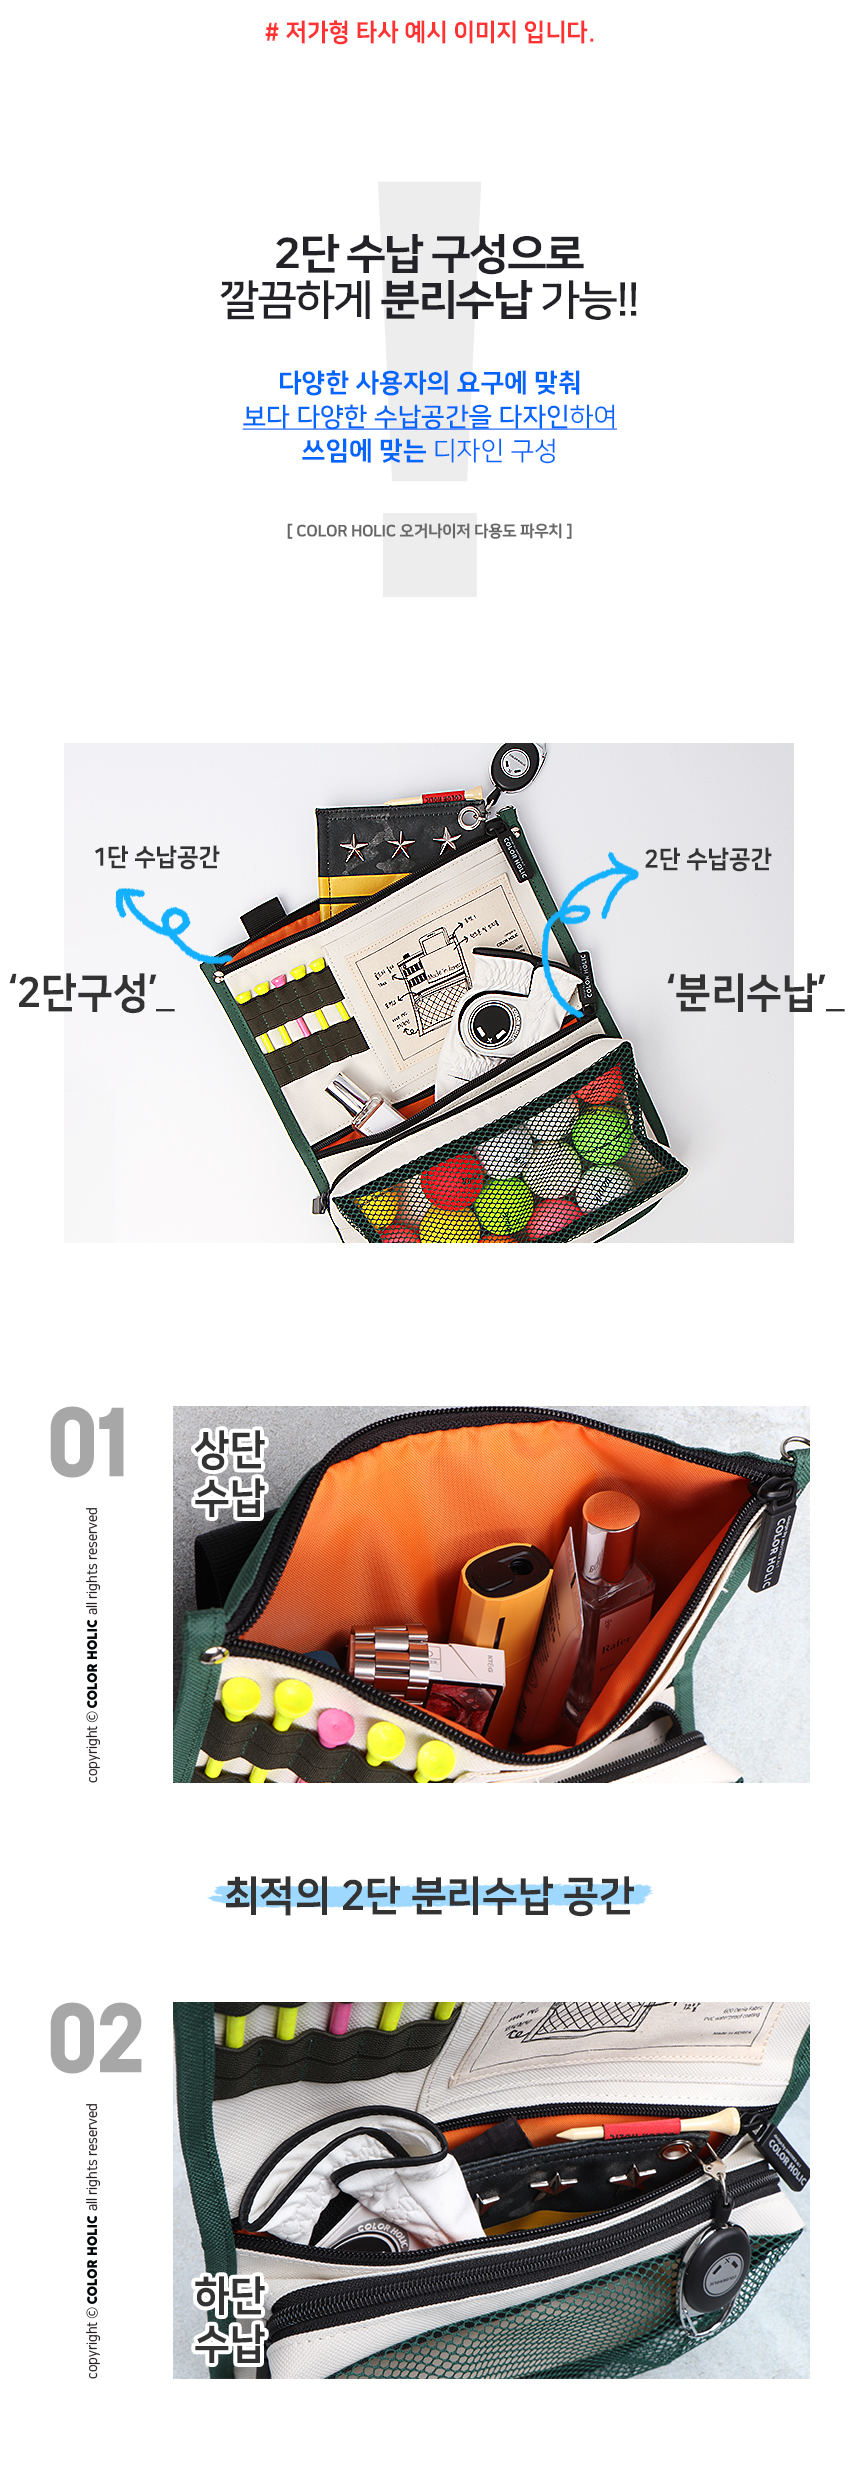 colorholic_golfcart_organizer_pouch_rok_04_page_title_story_box3_2.jpg